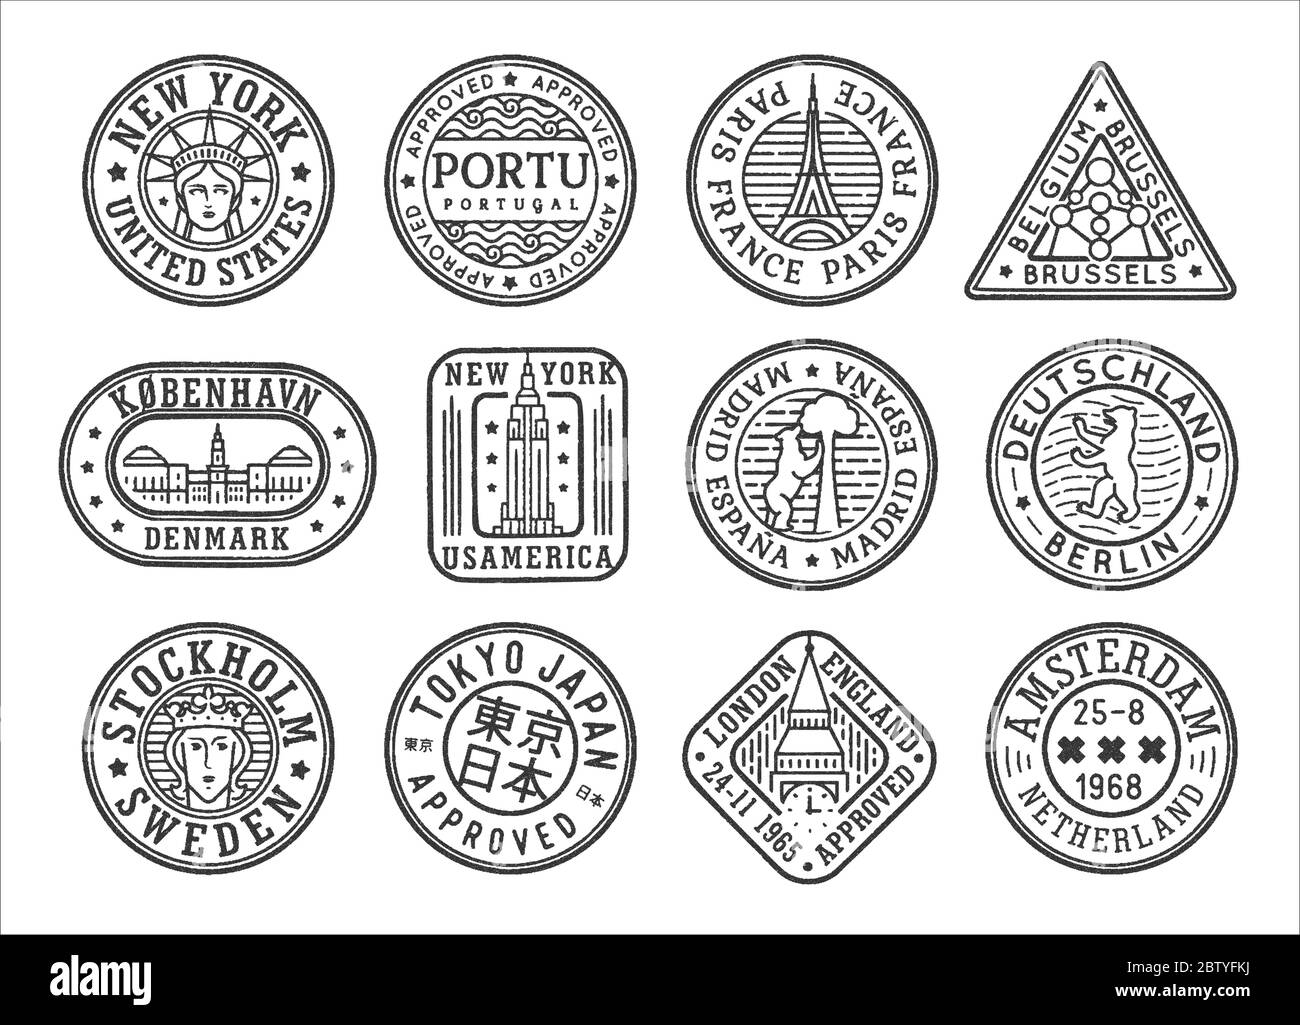 Stamp concept set with tourist attractions of world city and capital. Сoat of arm and symbol collection of city and country. Visa passport stamps Stock Vector